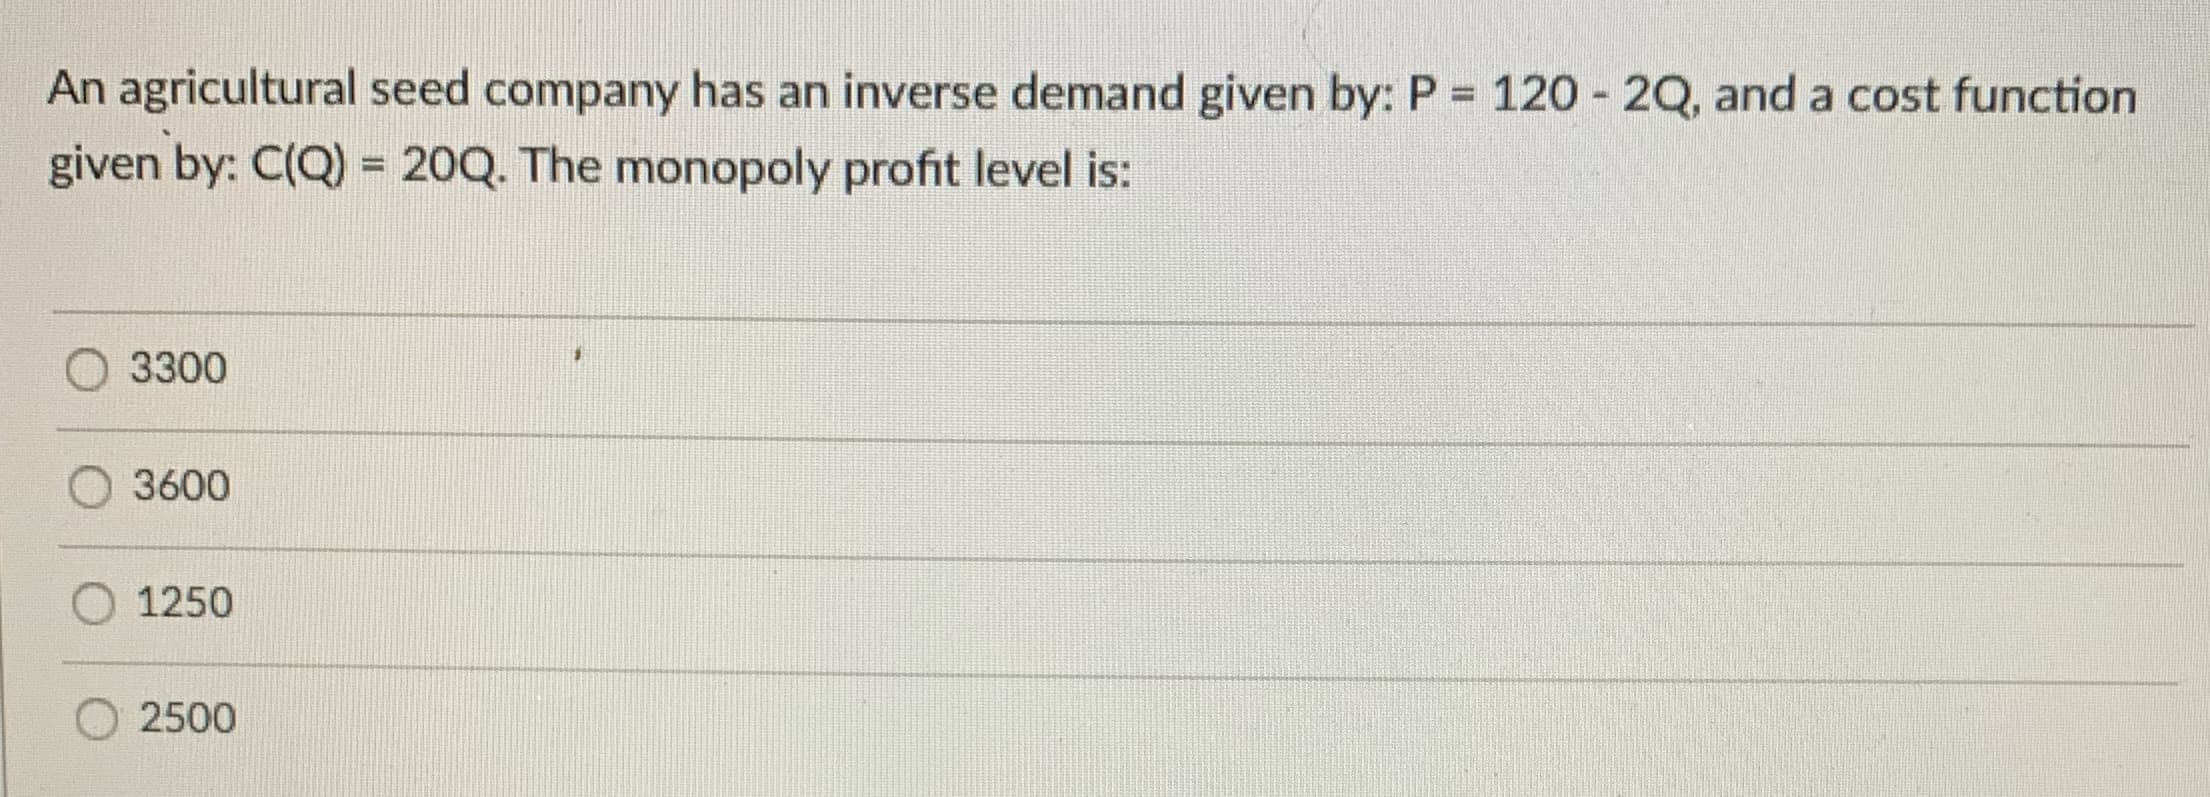 An agricultural seed company has an inverse demand given by: P = 120 - 2Q, and a cost function
given by: C(Q) = 20Q. The monopoly profit level is:
O 3300
3600
1250
O 2500
